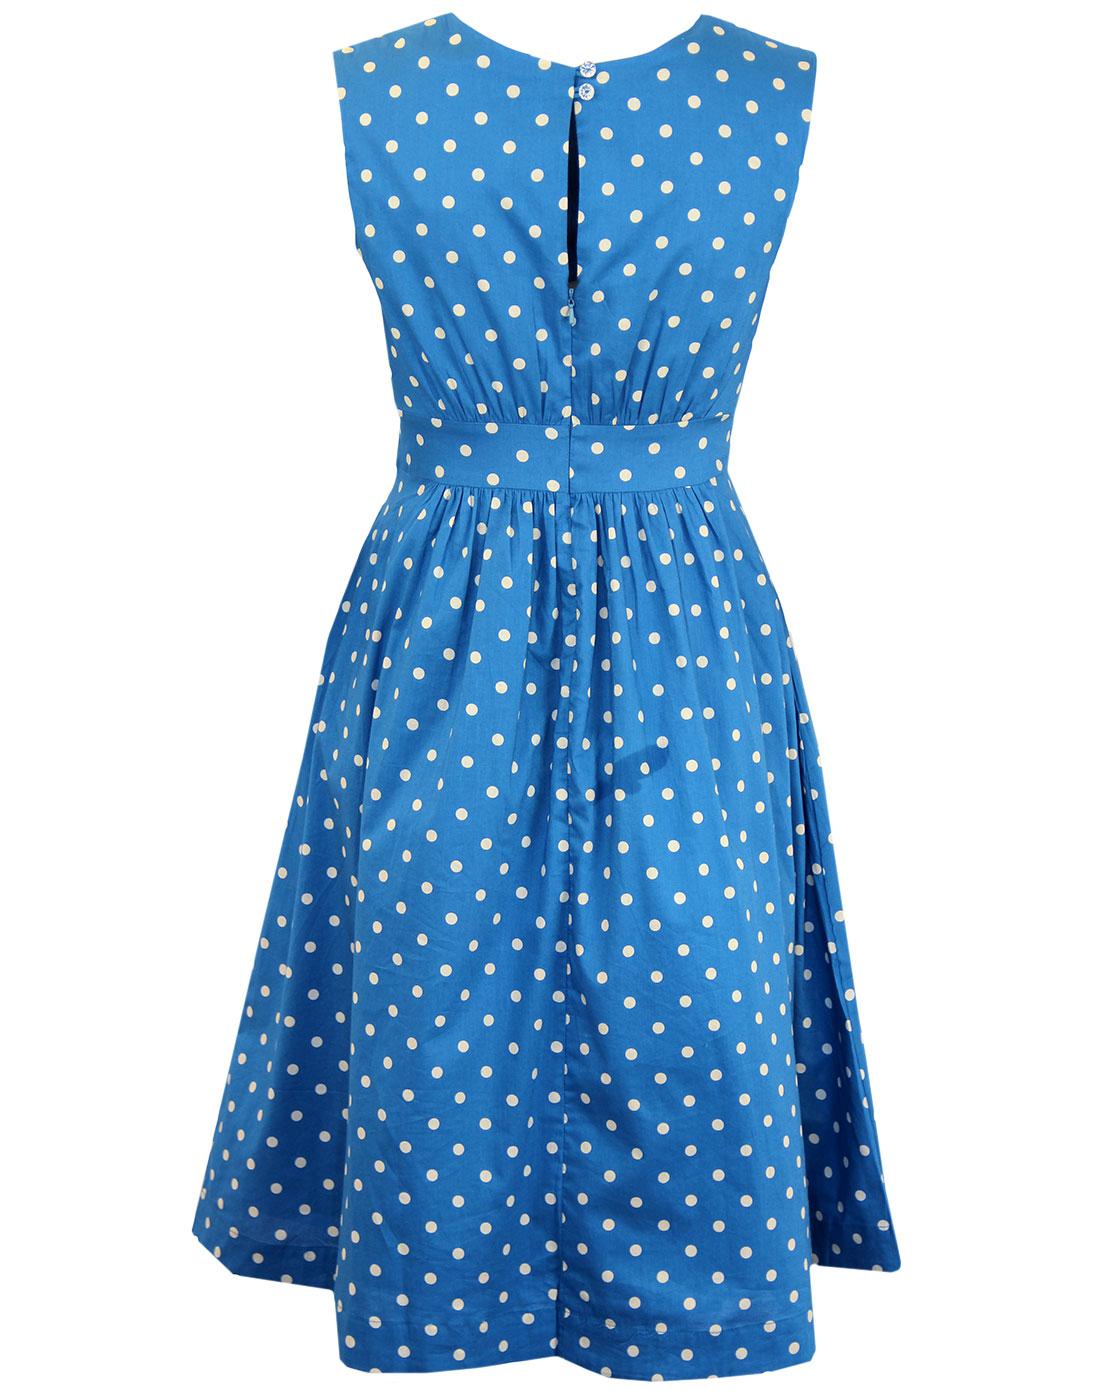 EMILY AND FIN Lucy Polka Dot Retro 60s A-Line Mod Dress in Blue